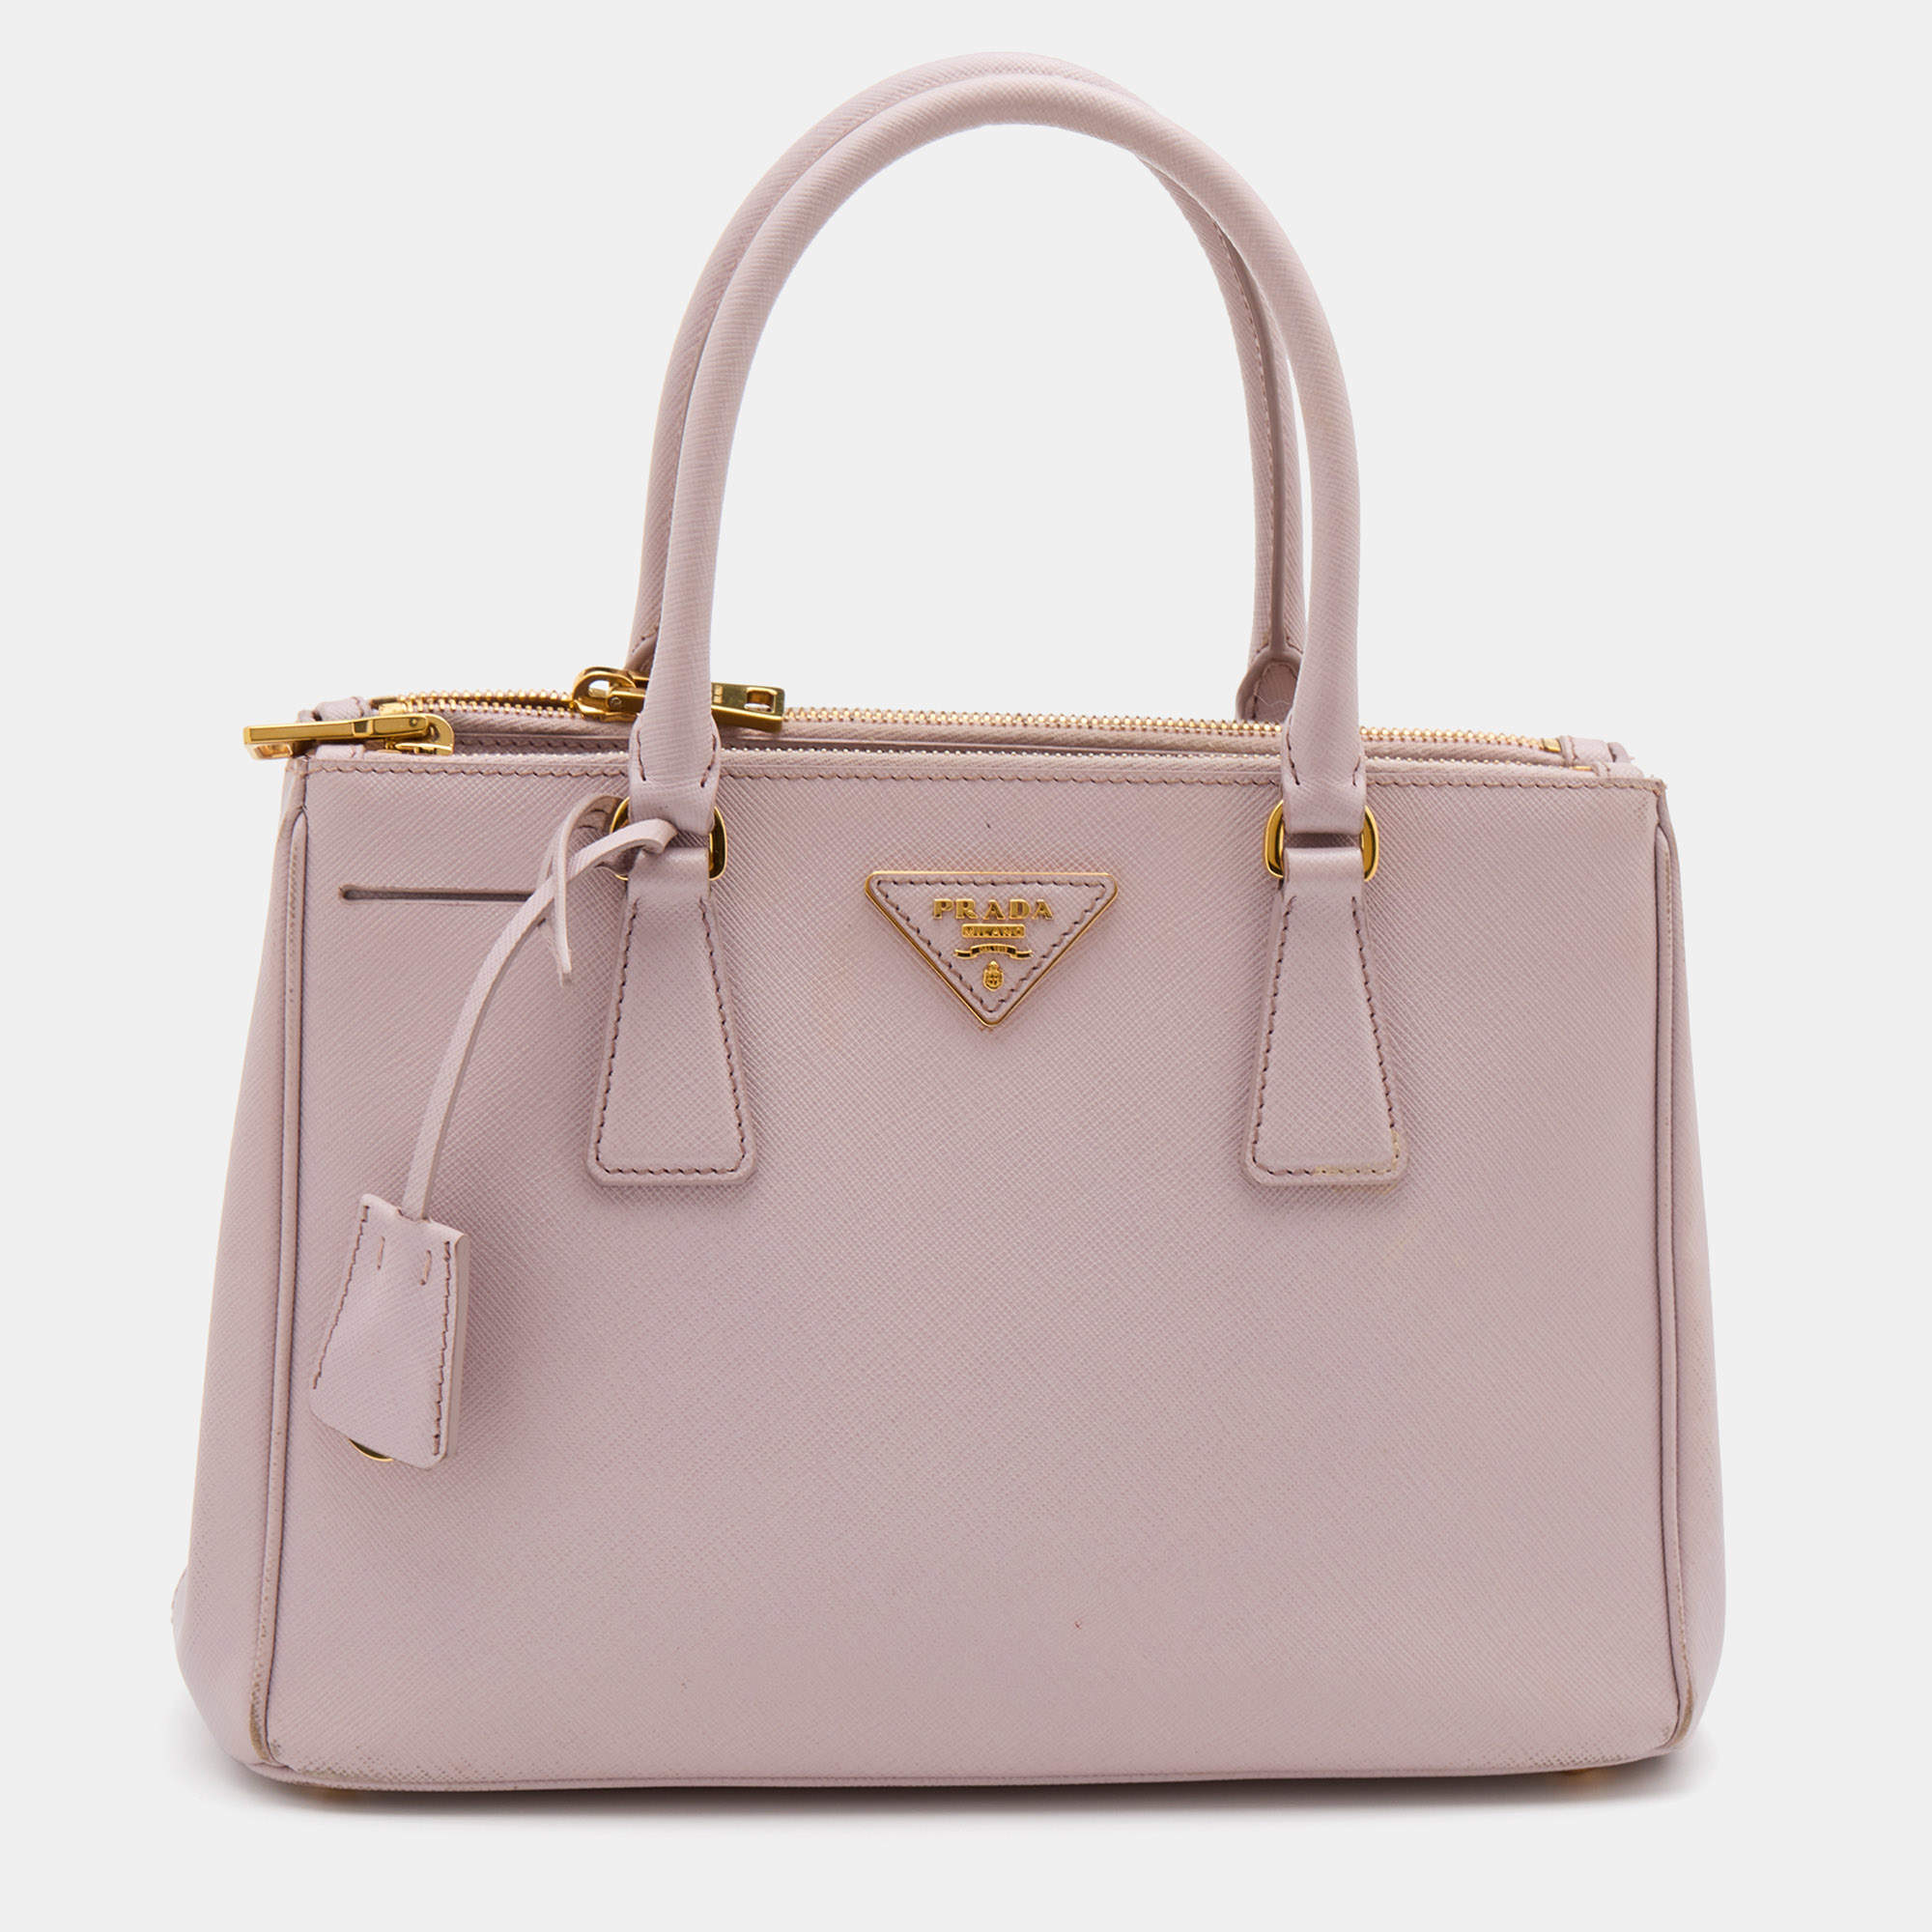 Prada Rose Pink Saffiano Leather Small Double Zip Tote